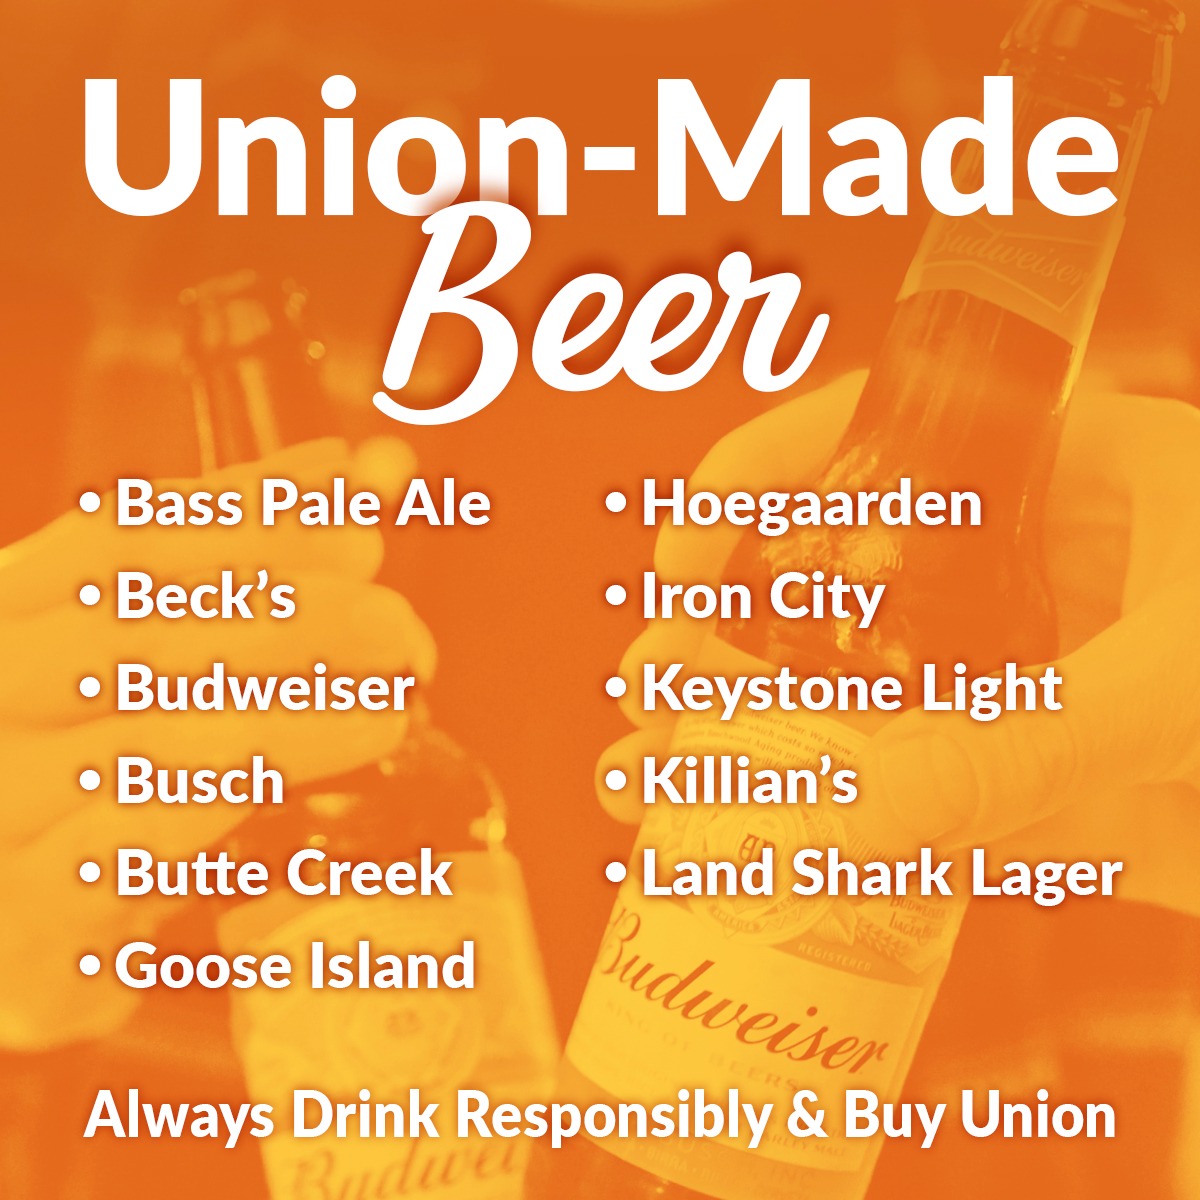 Enjoy a #UnionMade beer this weekend! #LiUNA #FeelThePower